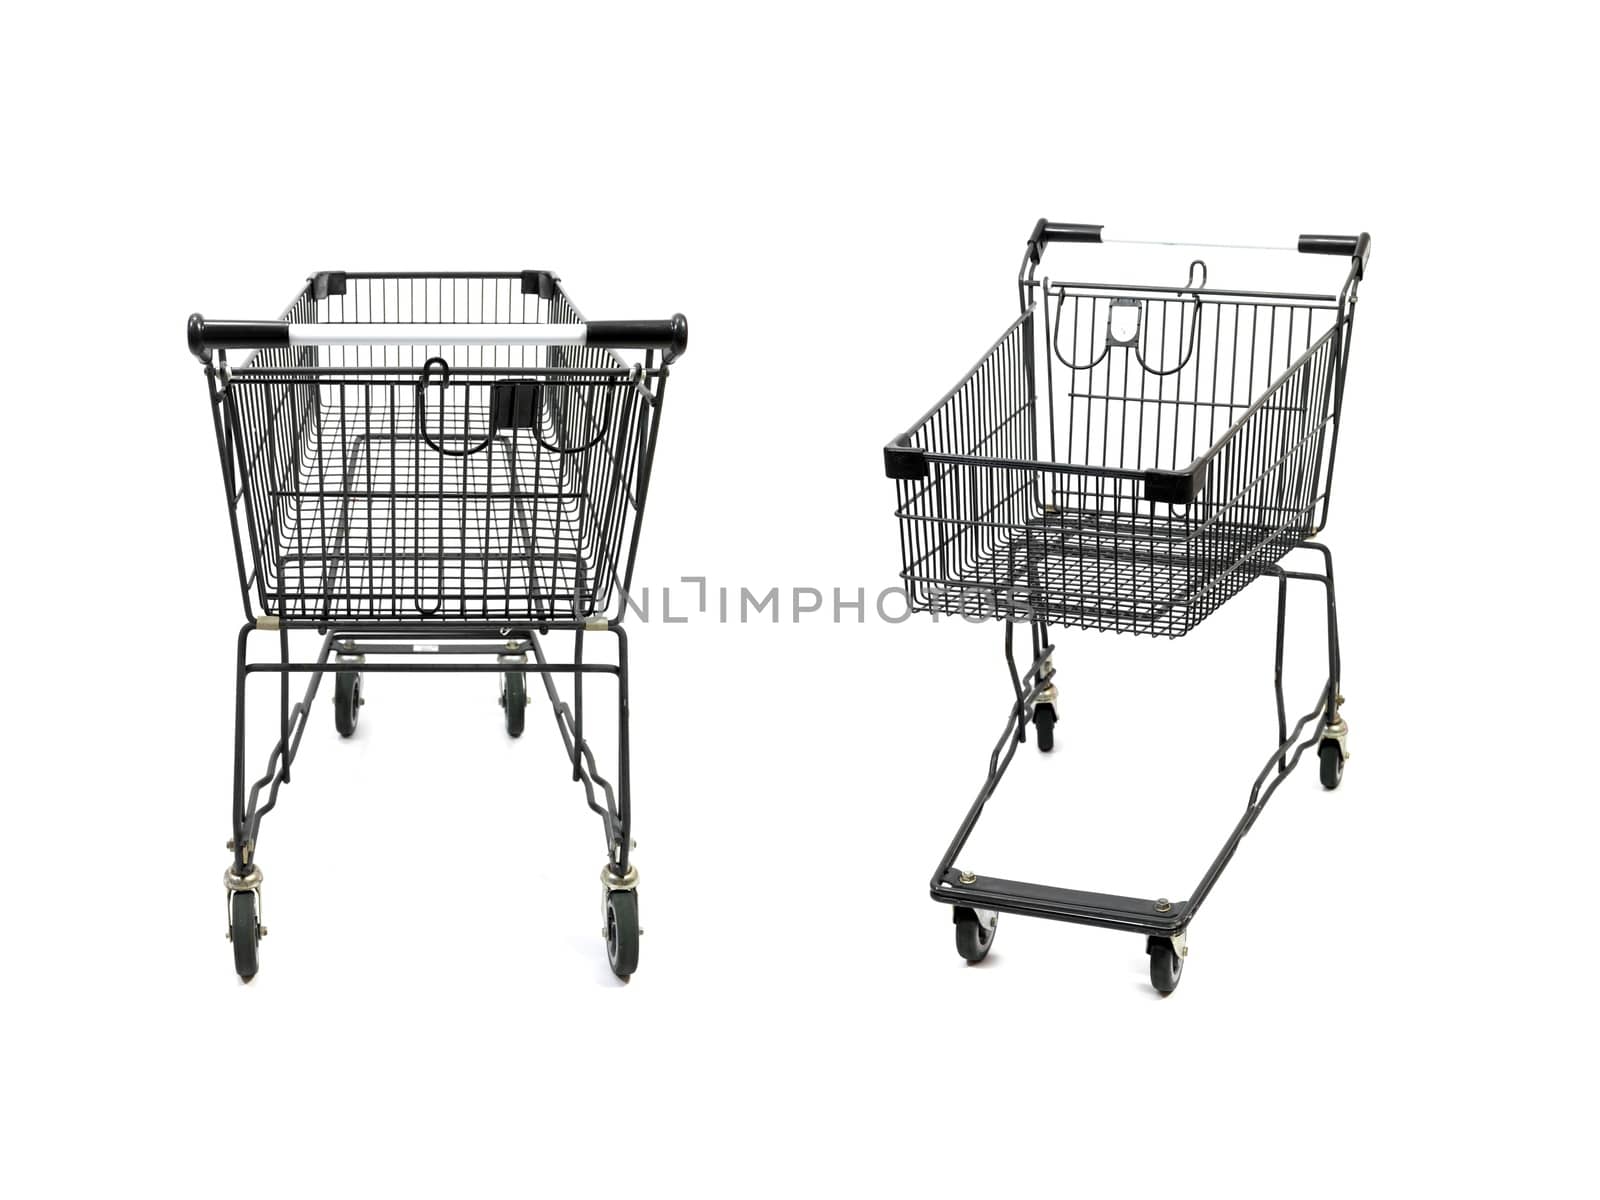 A shopping trolley isolated against a white background